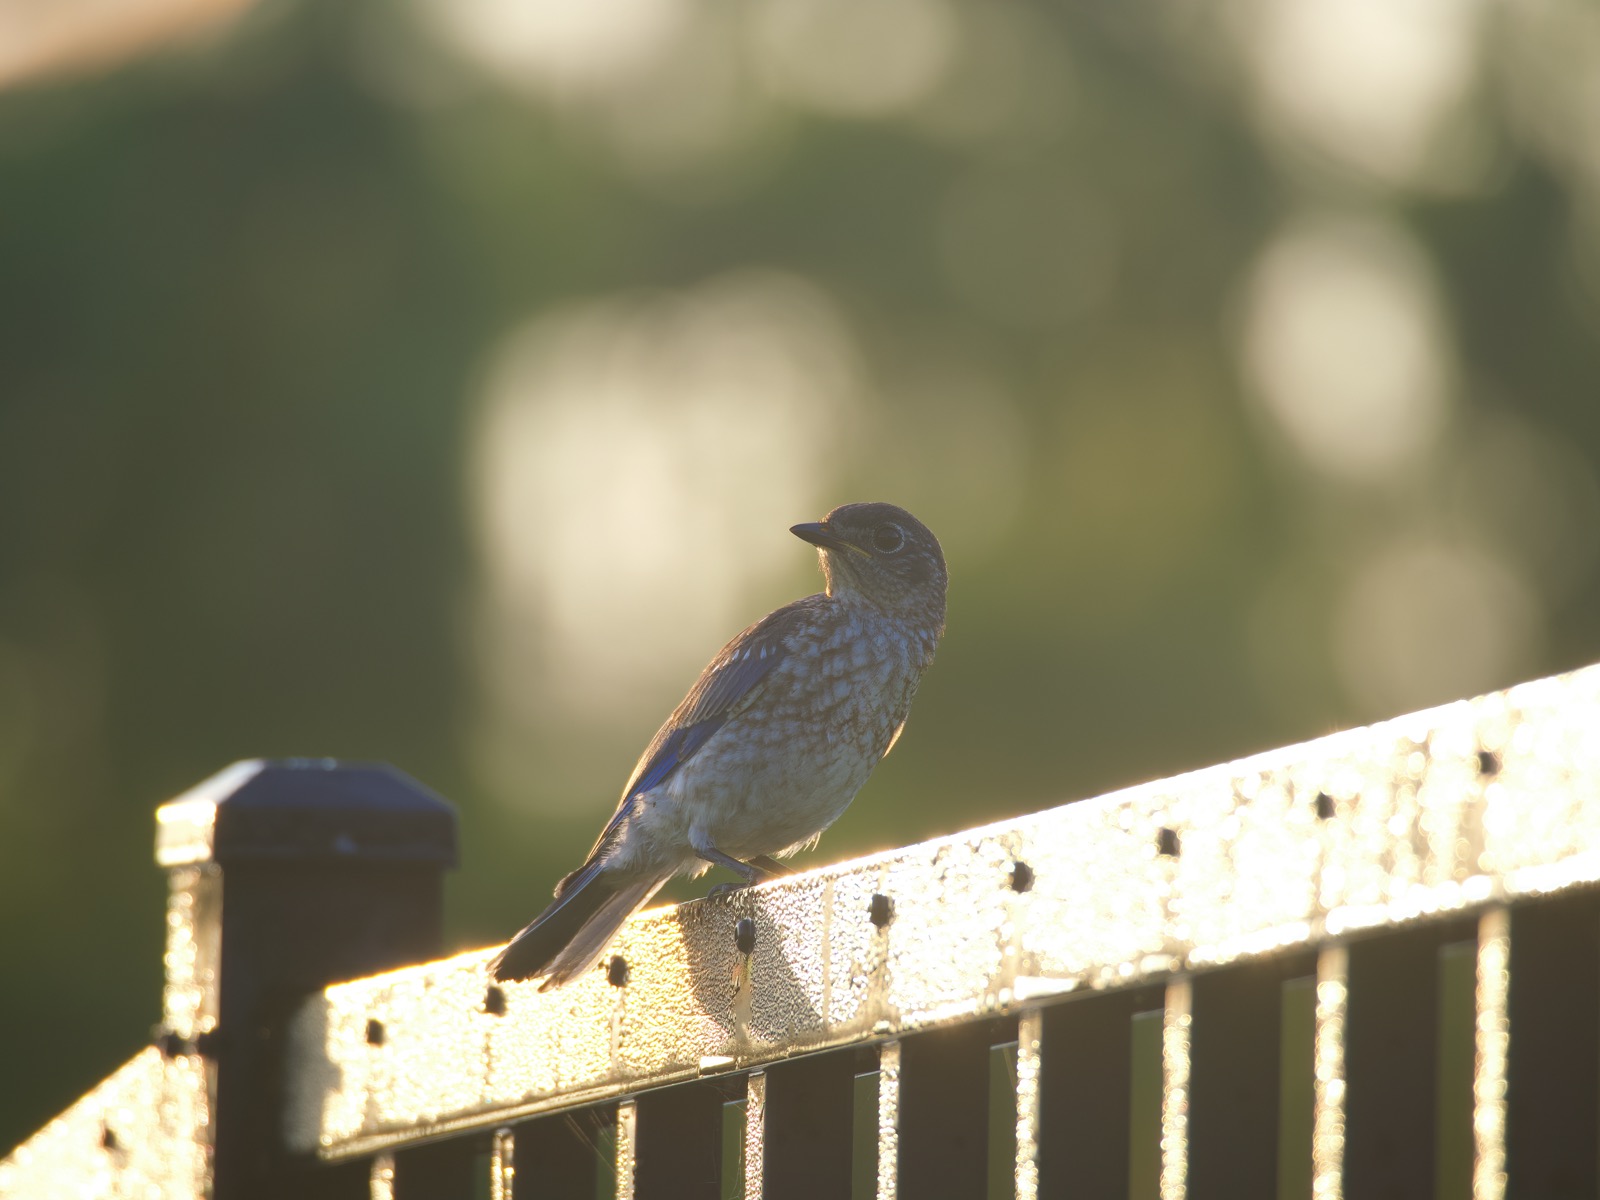 Bluebird perched on a metal fence rail looking over its wing at the camera, backlit, low contrast.